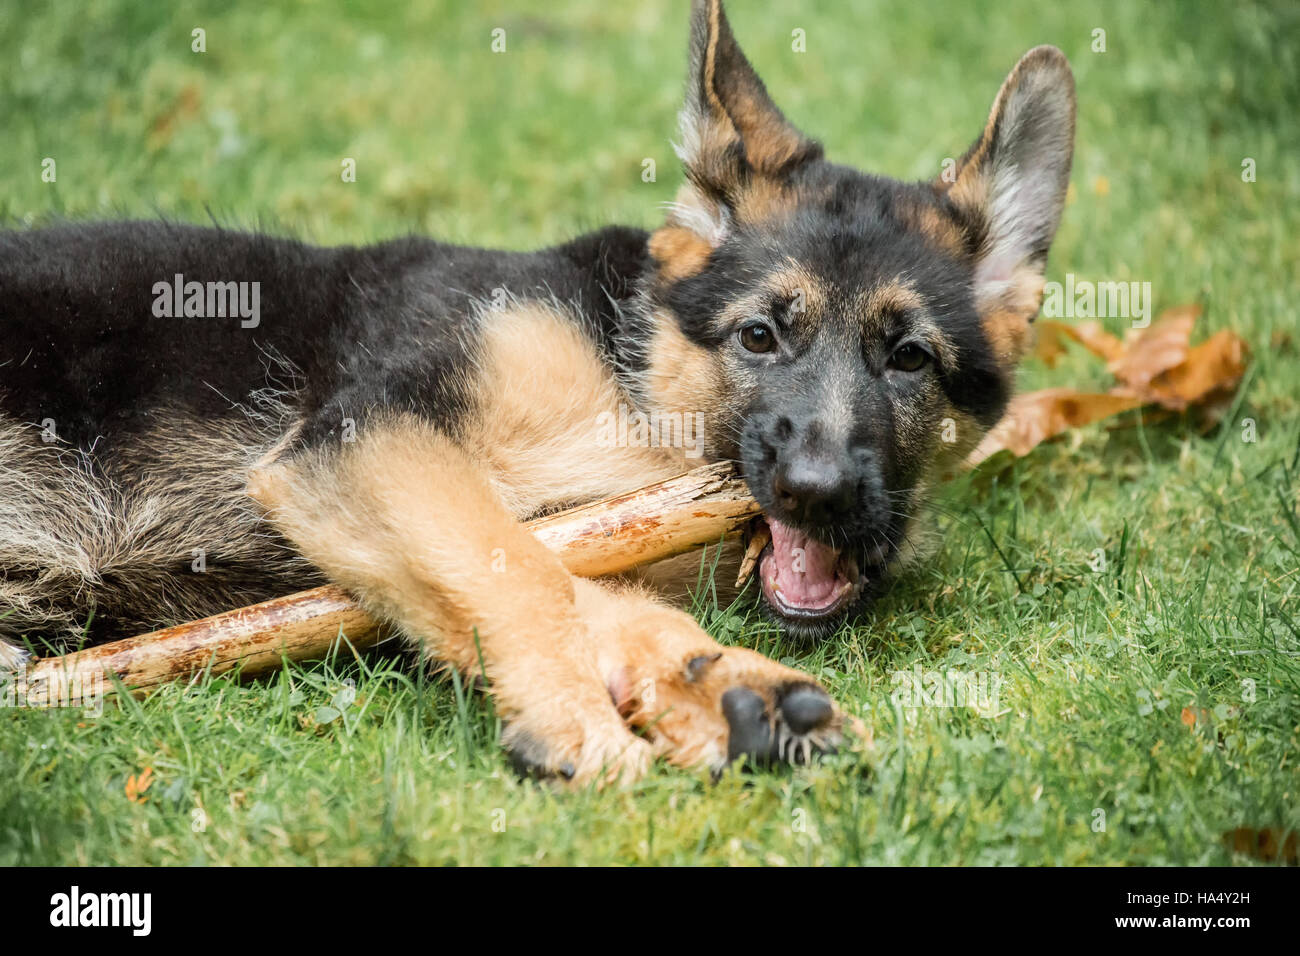 Three month old German Shepherd, Greta, chewing on a stick in her yard in Issaquah, Washington, USA. Stock Photo